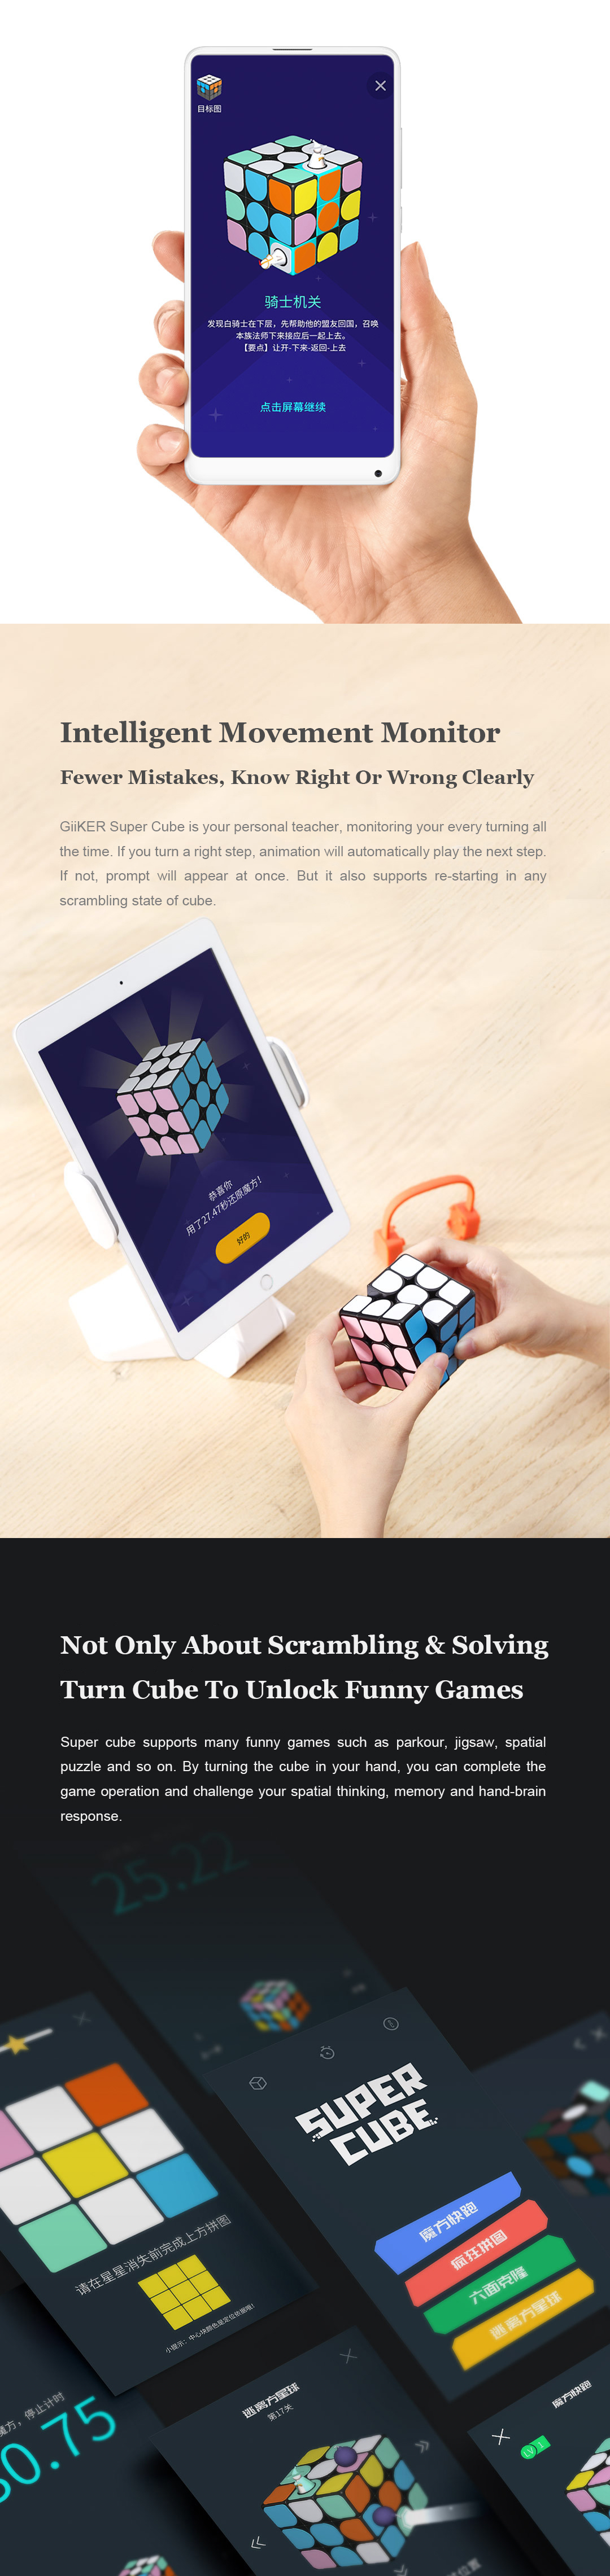 Xiaomi Giiker Super Square Magic Cube Smart App Real-time Synchronization Science Education Toy Gift 35